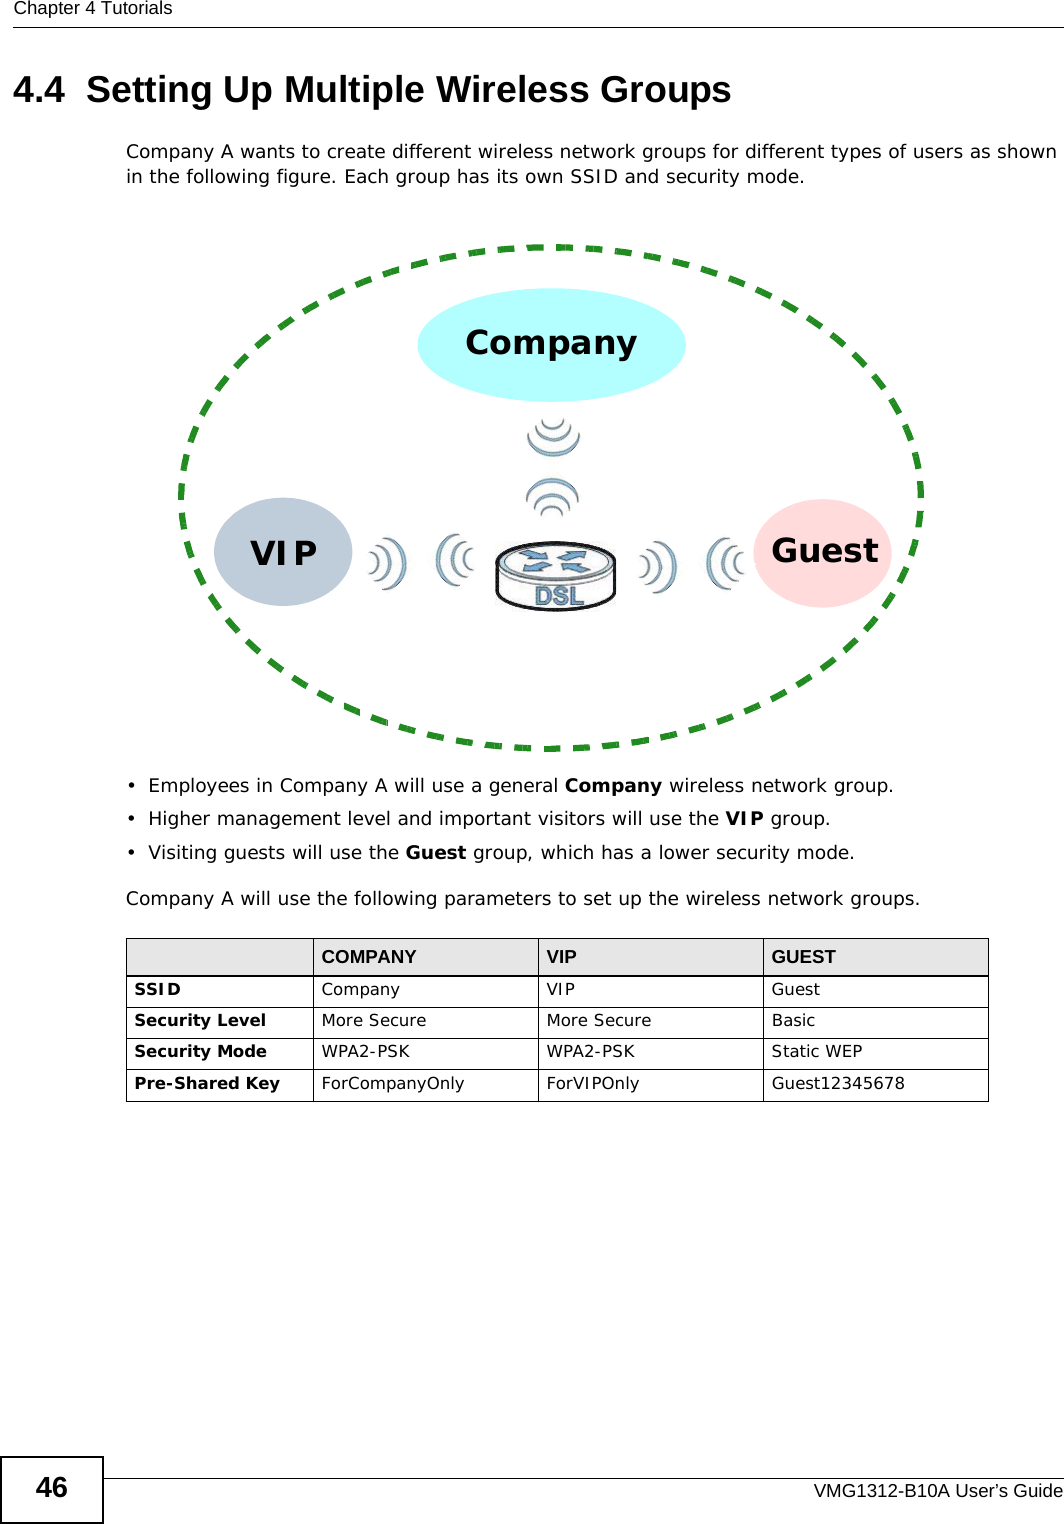 Chapter 4 TutorialsVMG1312-B10A User’s Guide464.4  Setting Up Multiple Wireless GroupsCompany A wants to create different wireless network groups for different types of users as shown in the following figure. Each group has its own SSID and security mode.• Employees in Company A will use a general Company wireless network group.• Higher management level and important visitors will use the VIP group.• Visiting guests will use the Guest group, which has a lower security mode.Company A will use the following parameters to set up the wireless network groups.COMPANY VIP GUESTSSID Company VIP GuestSecurity Level More Secure More Secure BasicSecurity Mode WPA2-PSK WPA2-PSK Static WEPPre-Shared Key ForCompanyOnly ForVIPOnly Guest12345678CompanyVIP Guest